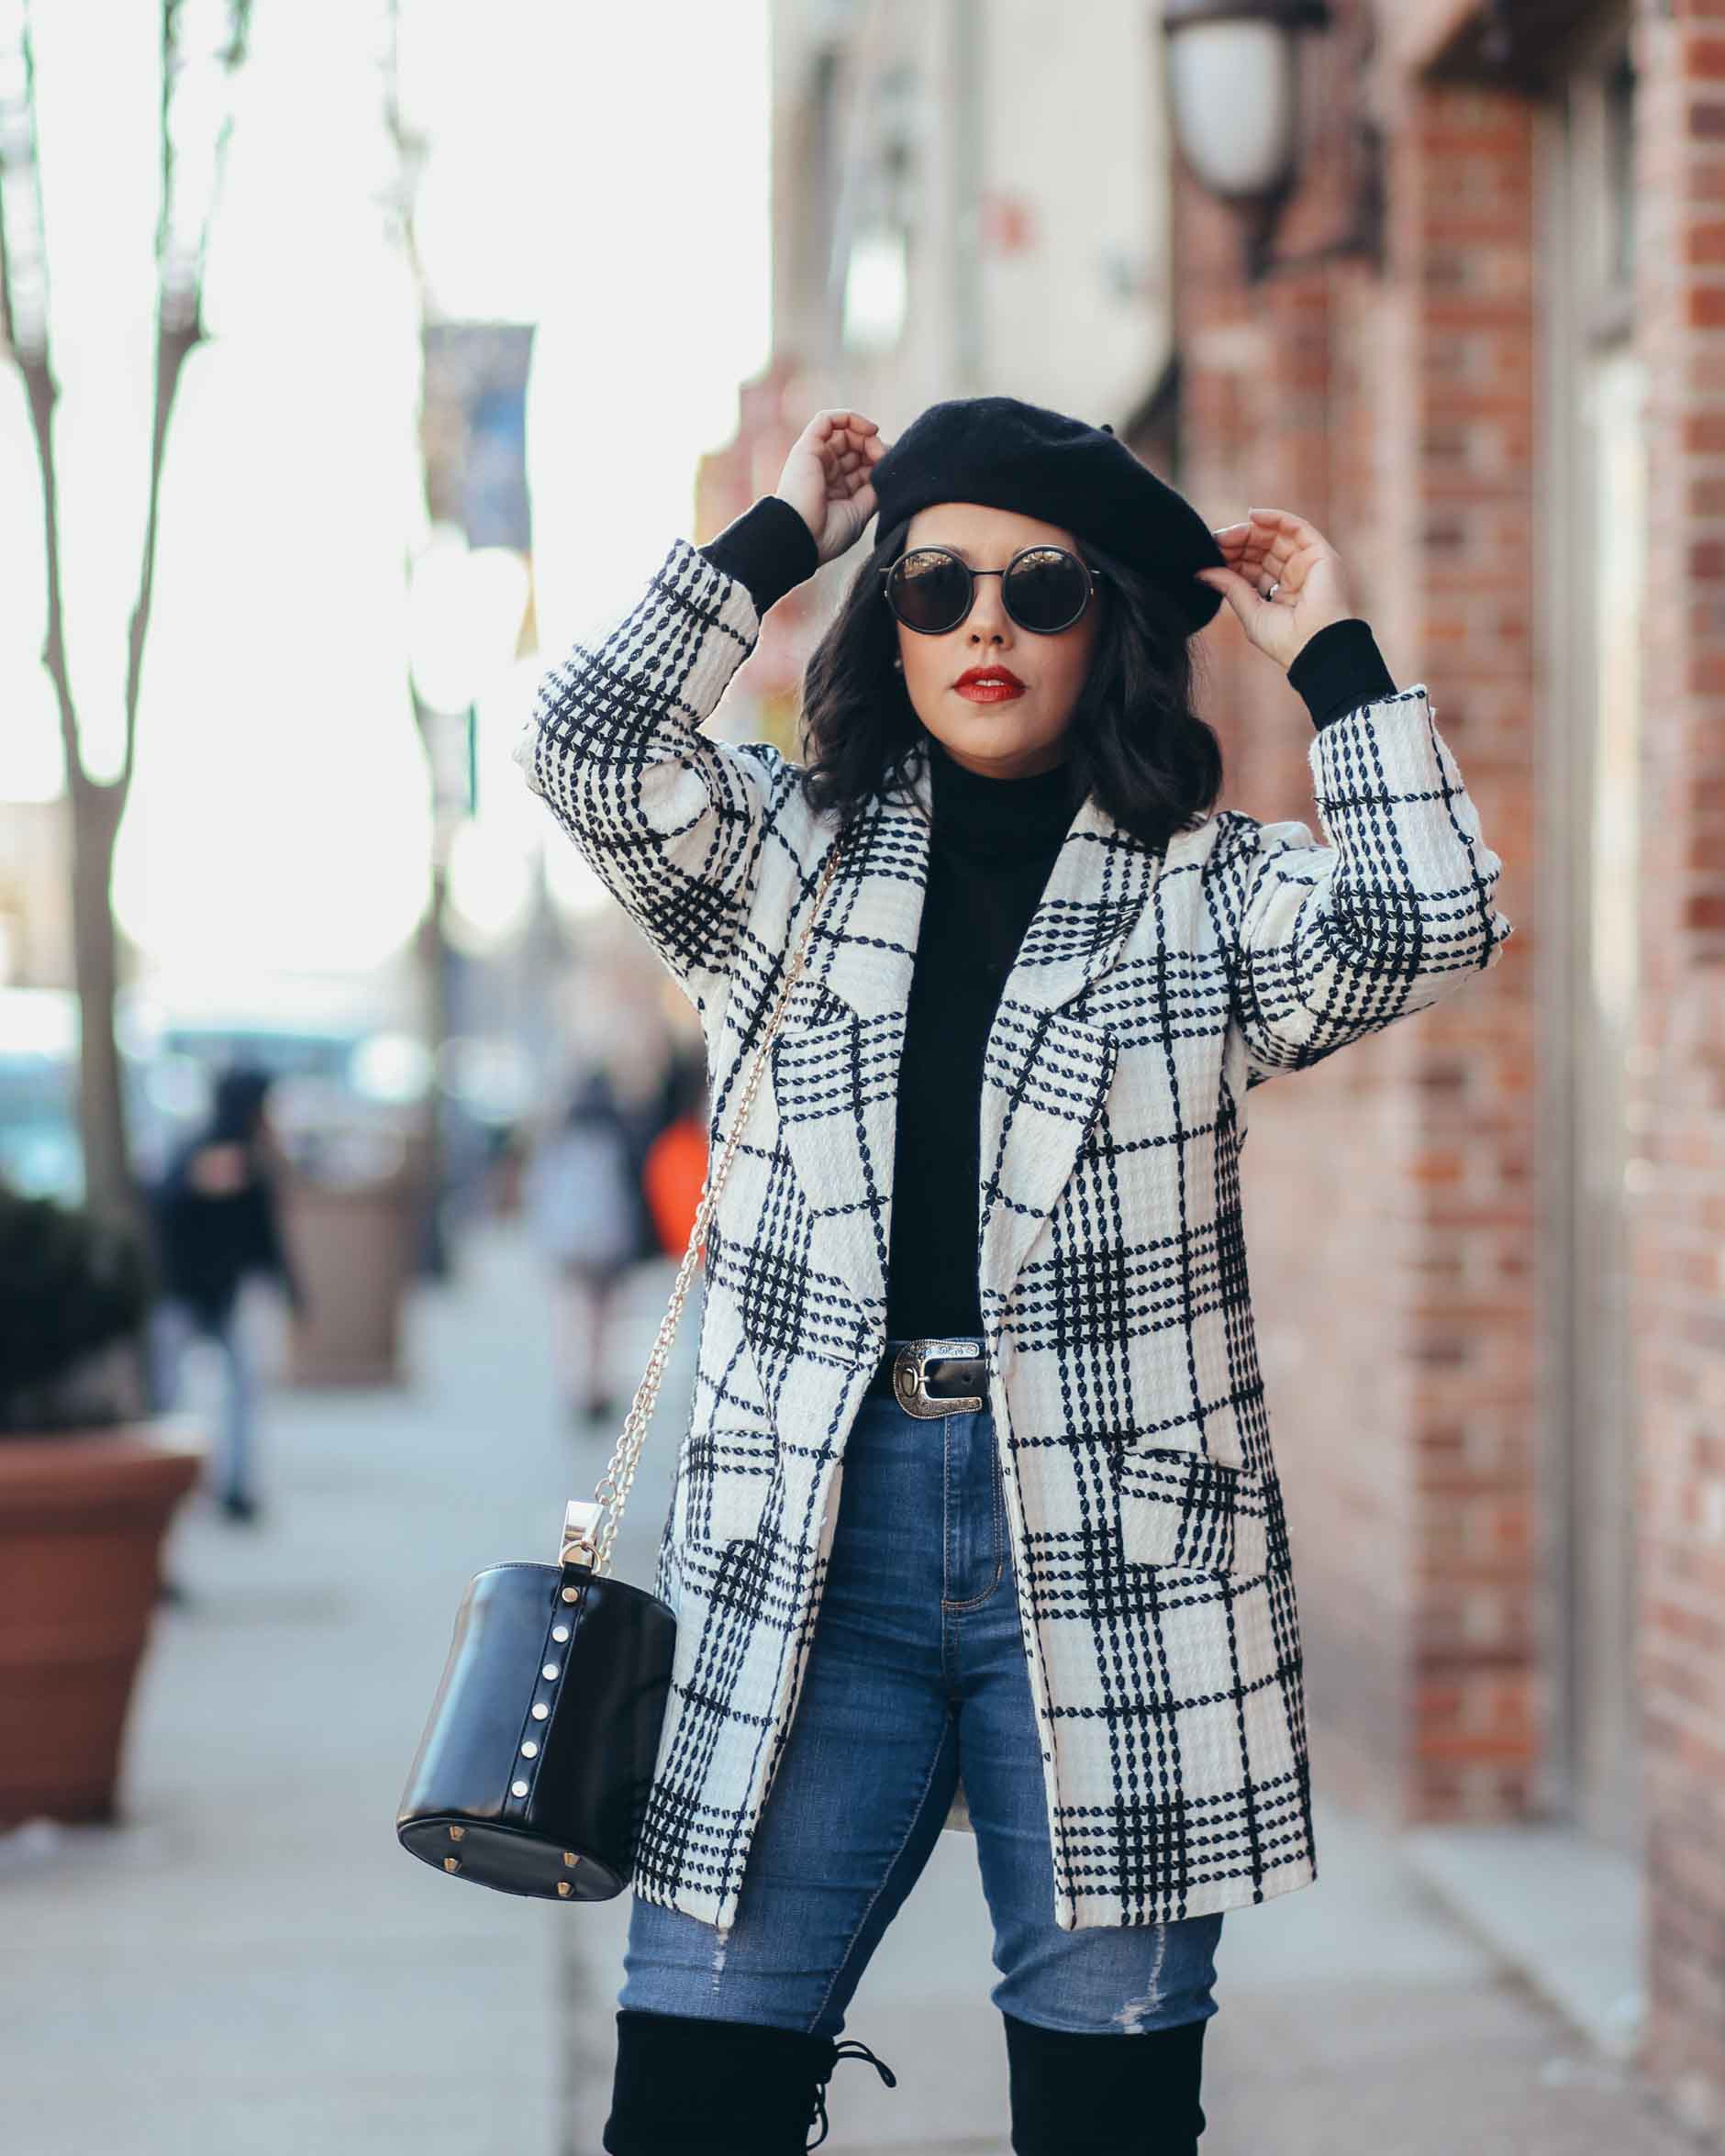 lifestyle blogger naty michele wearing a beret with a black and white coat and otk boots